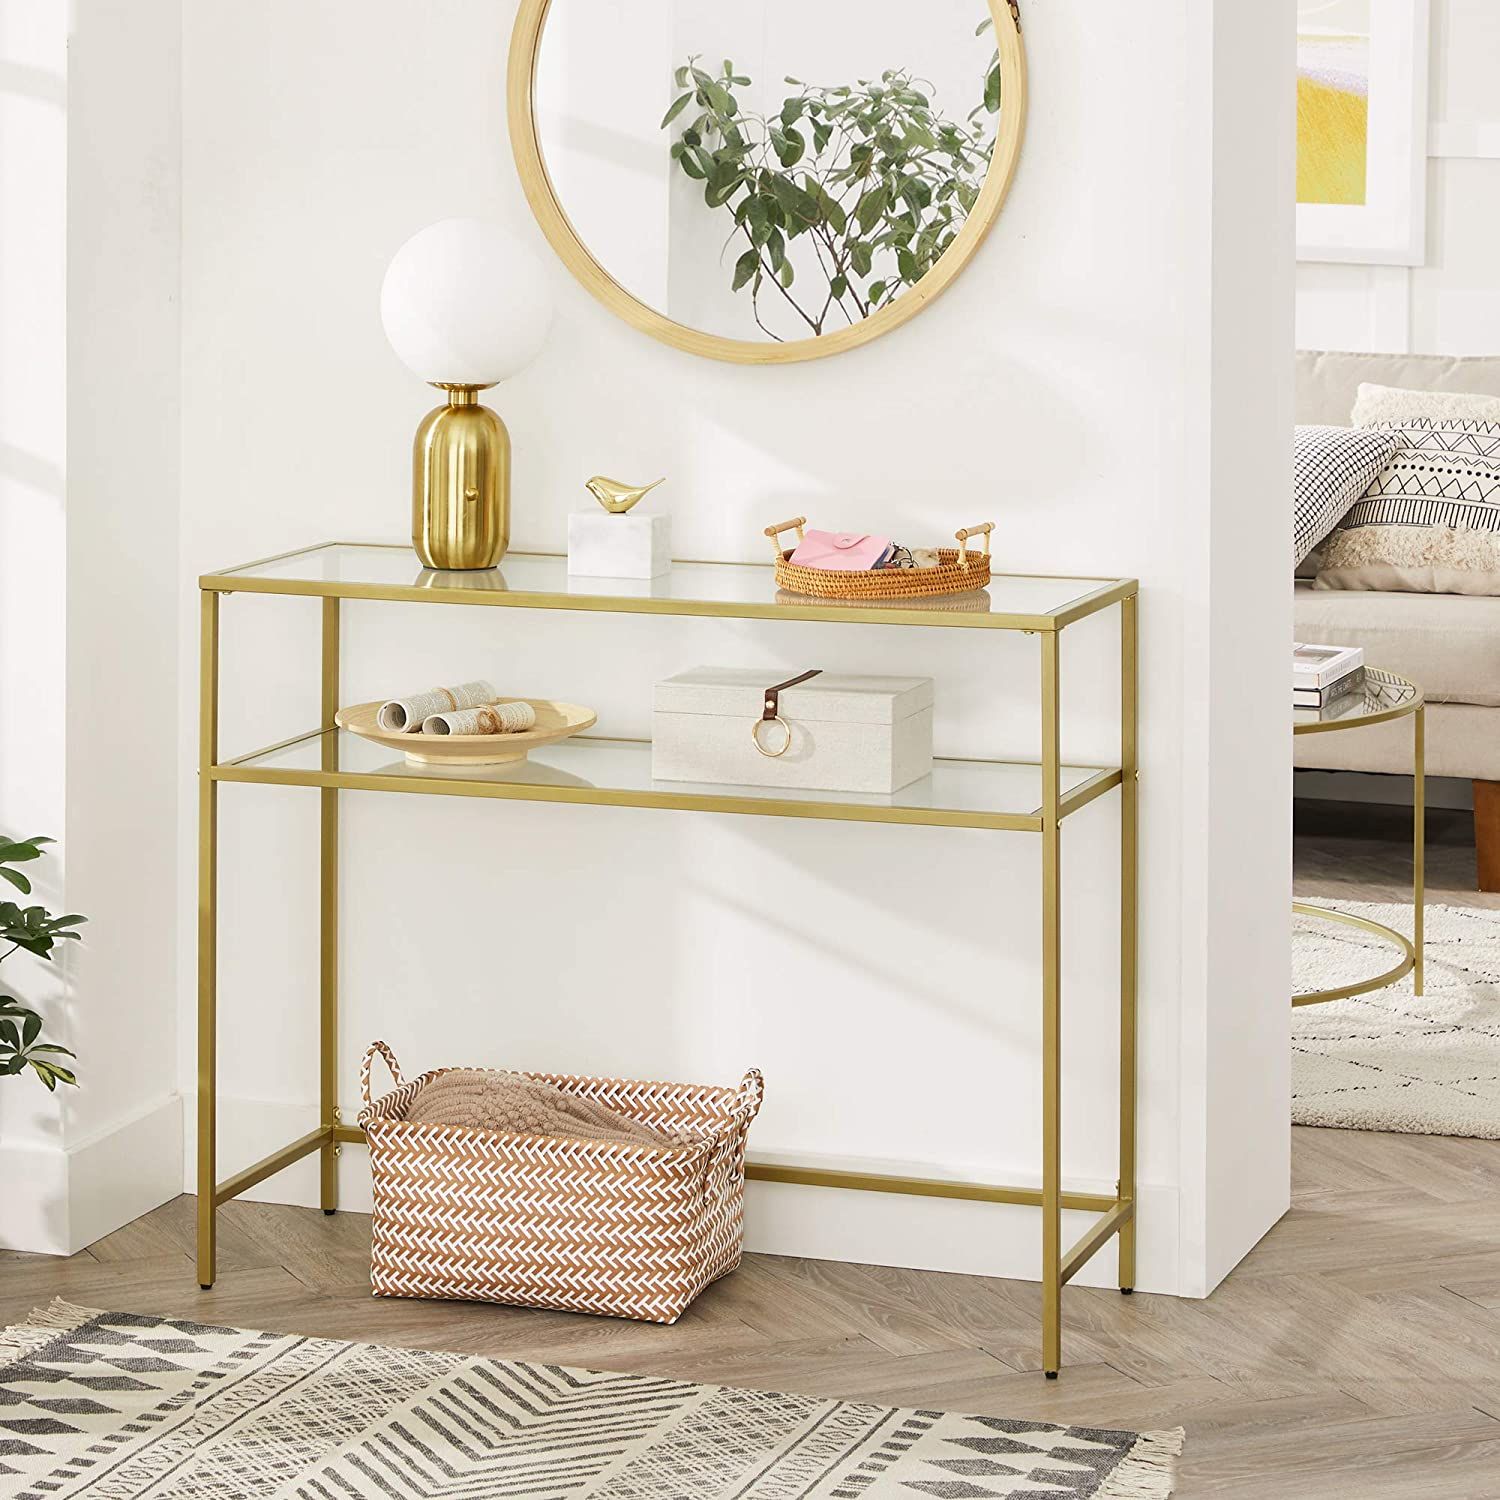 Vasagle Console Table, Modern Sofa Or Entryway Table, Gold – Walmart In Metallic Gold Modern Console Tables (View 7 of 20)